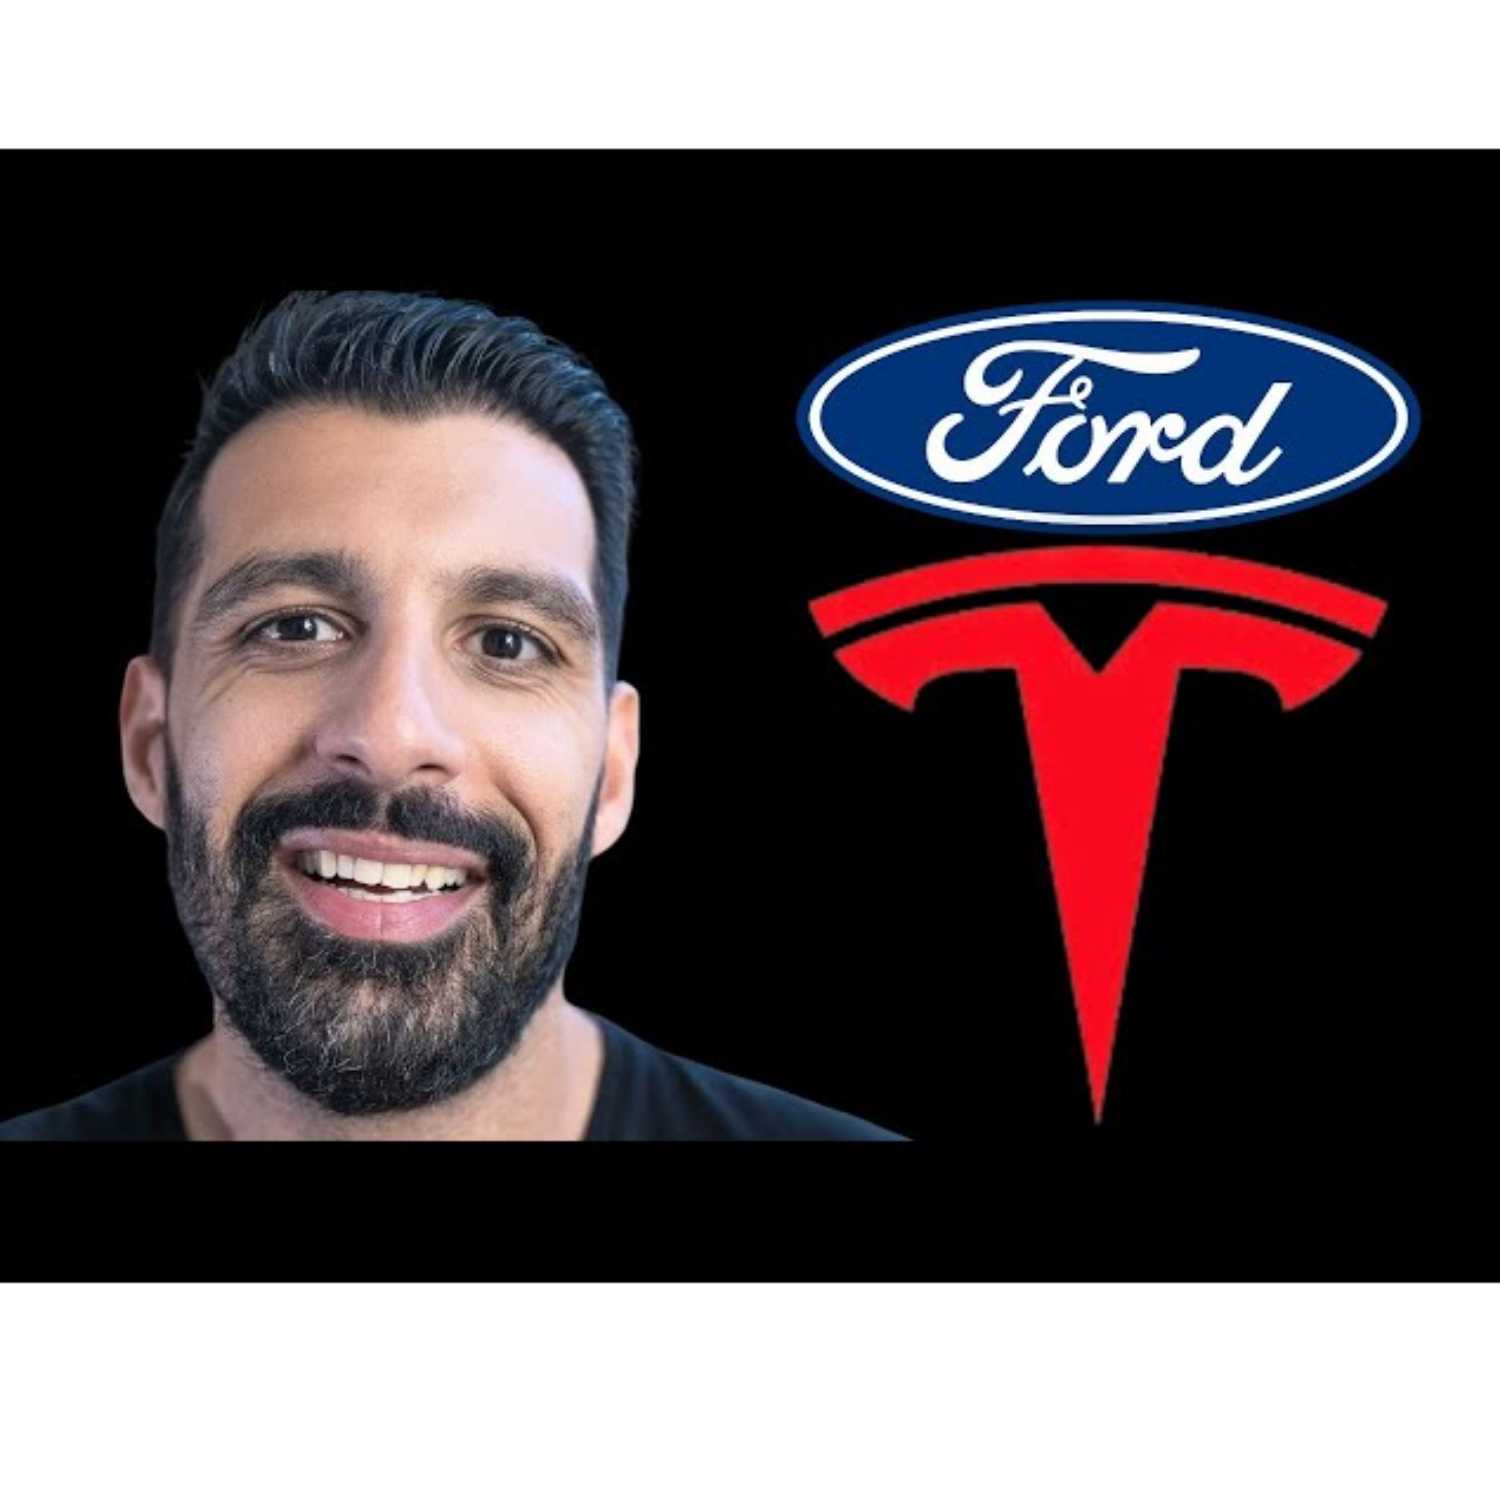 Tesla & Ford's Partnership is Just the Beginning